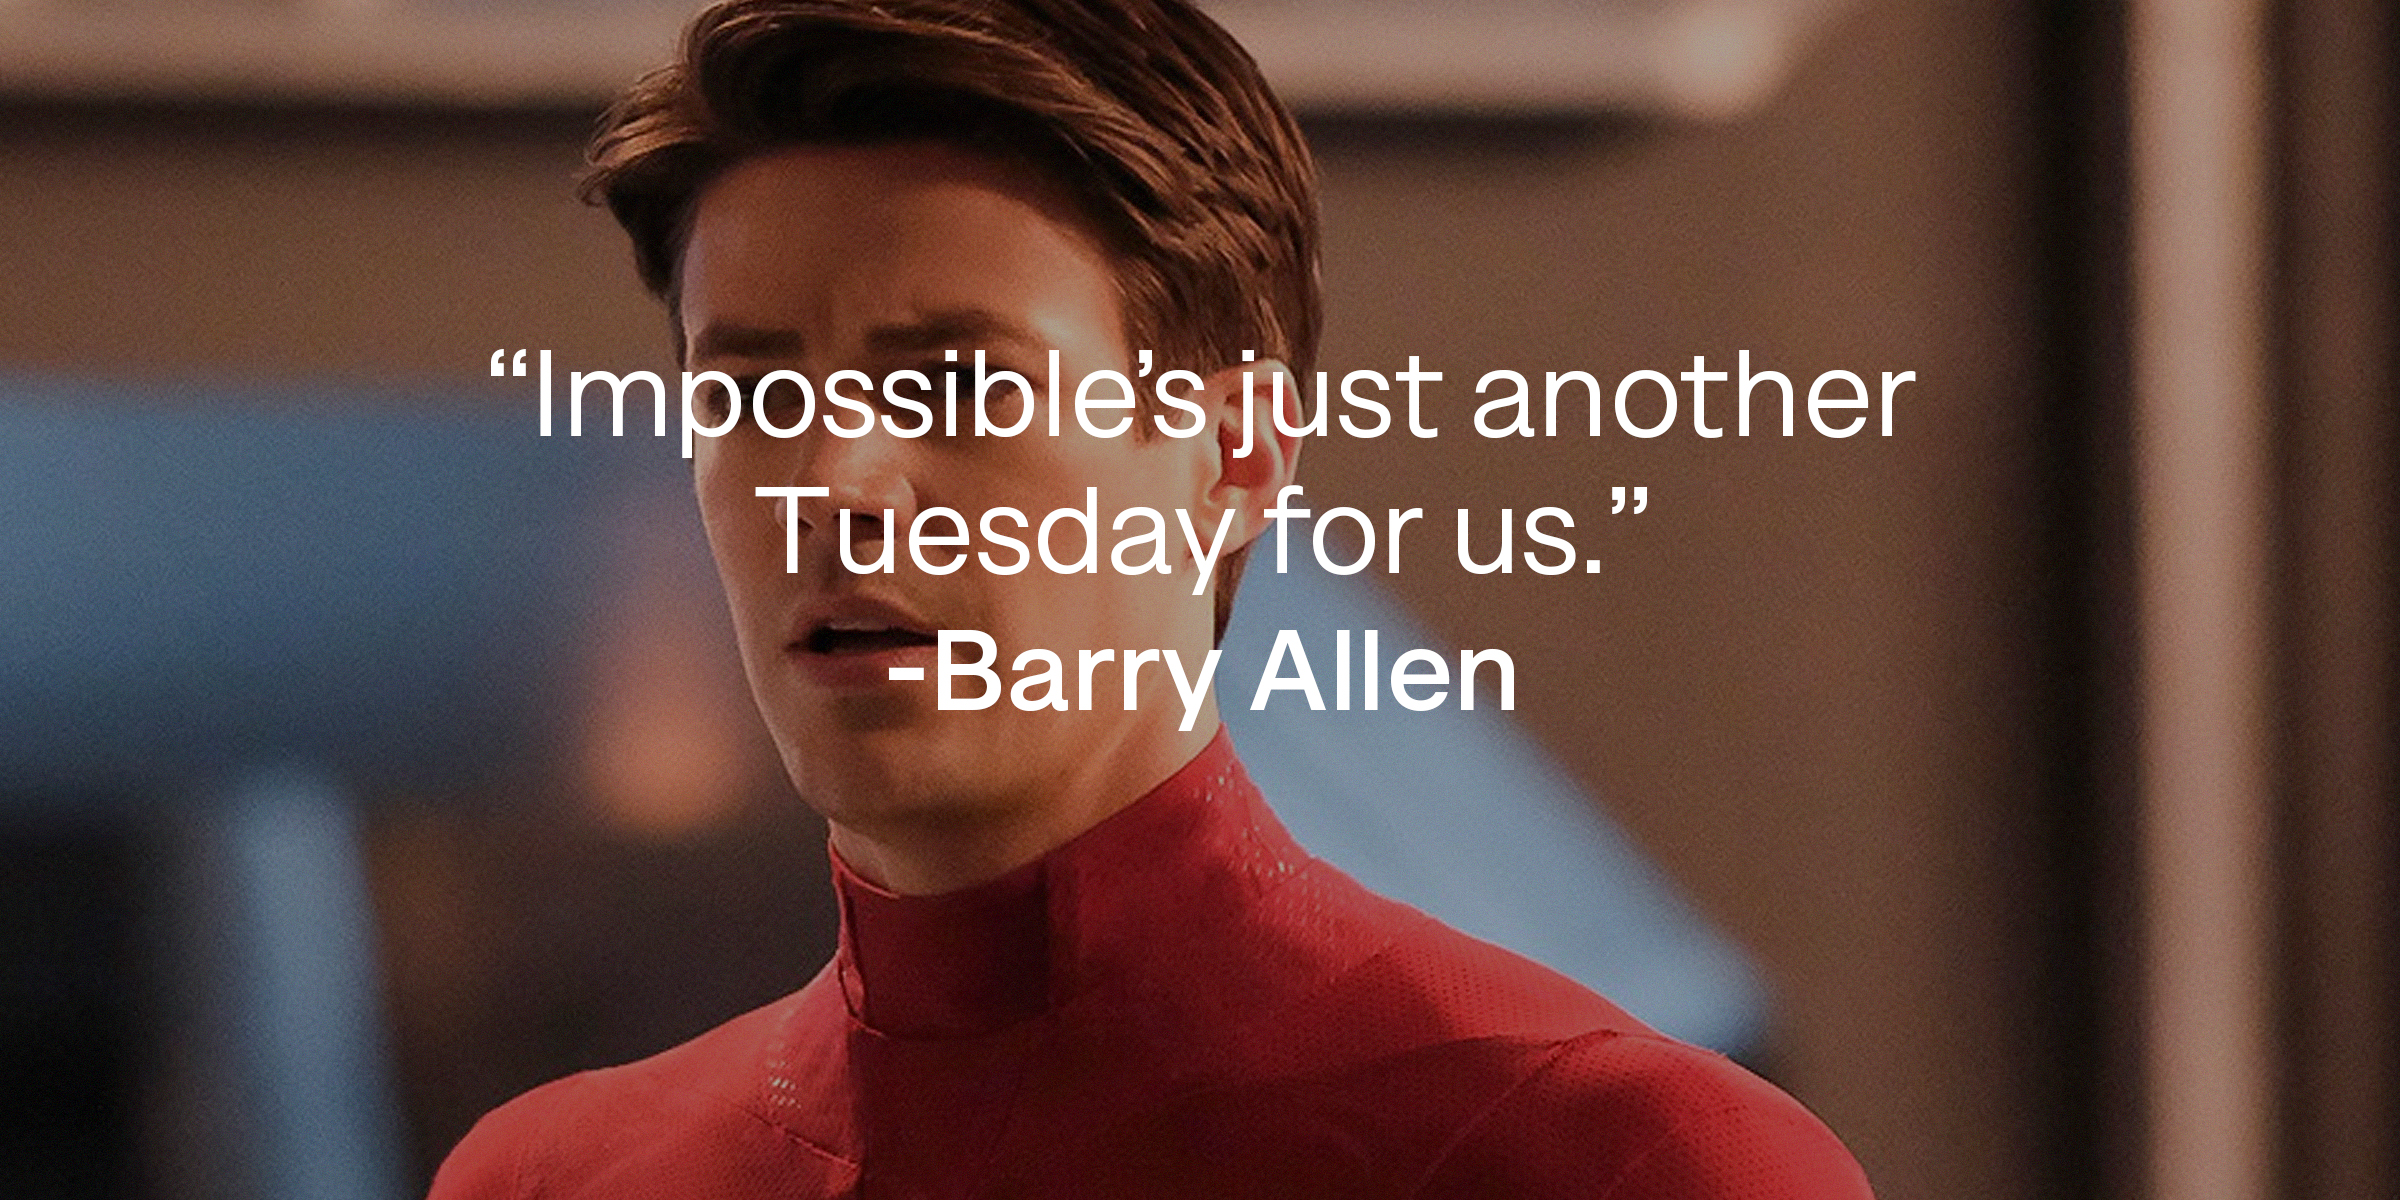 Barry Allen with His Quote, "Impossible's Just Another Tuesday for Us" | Source: Facebook/CWTheFlash